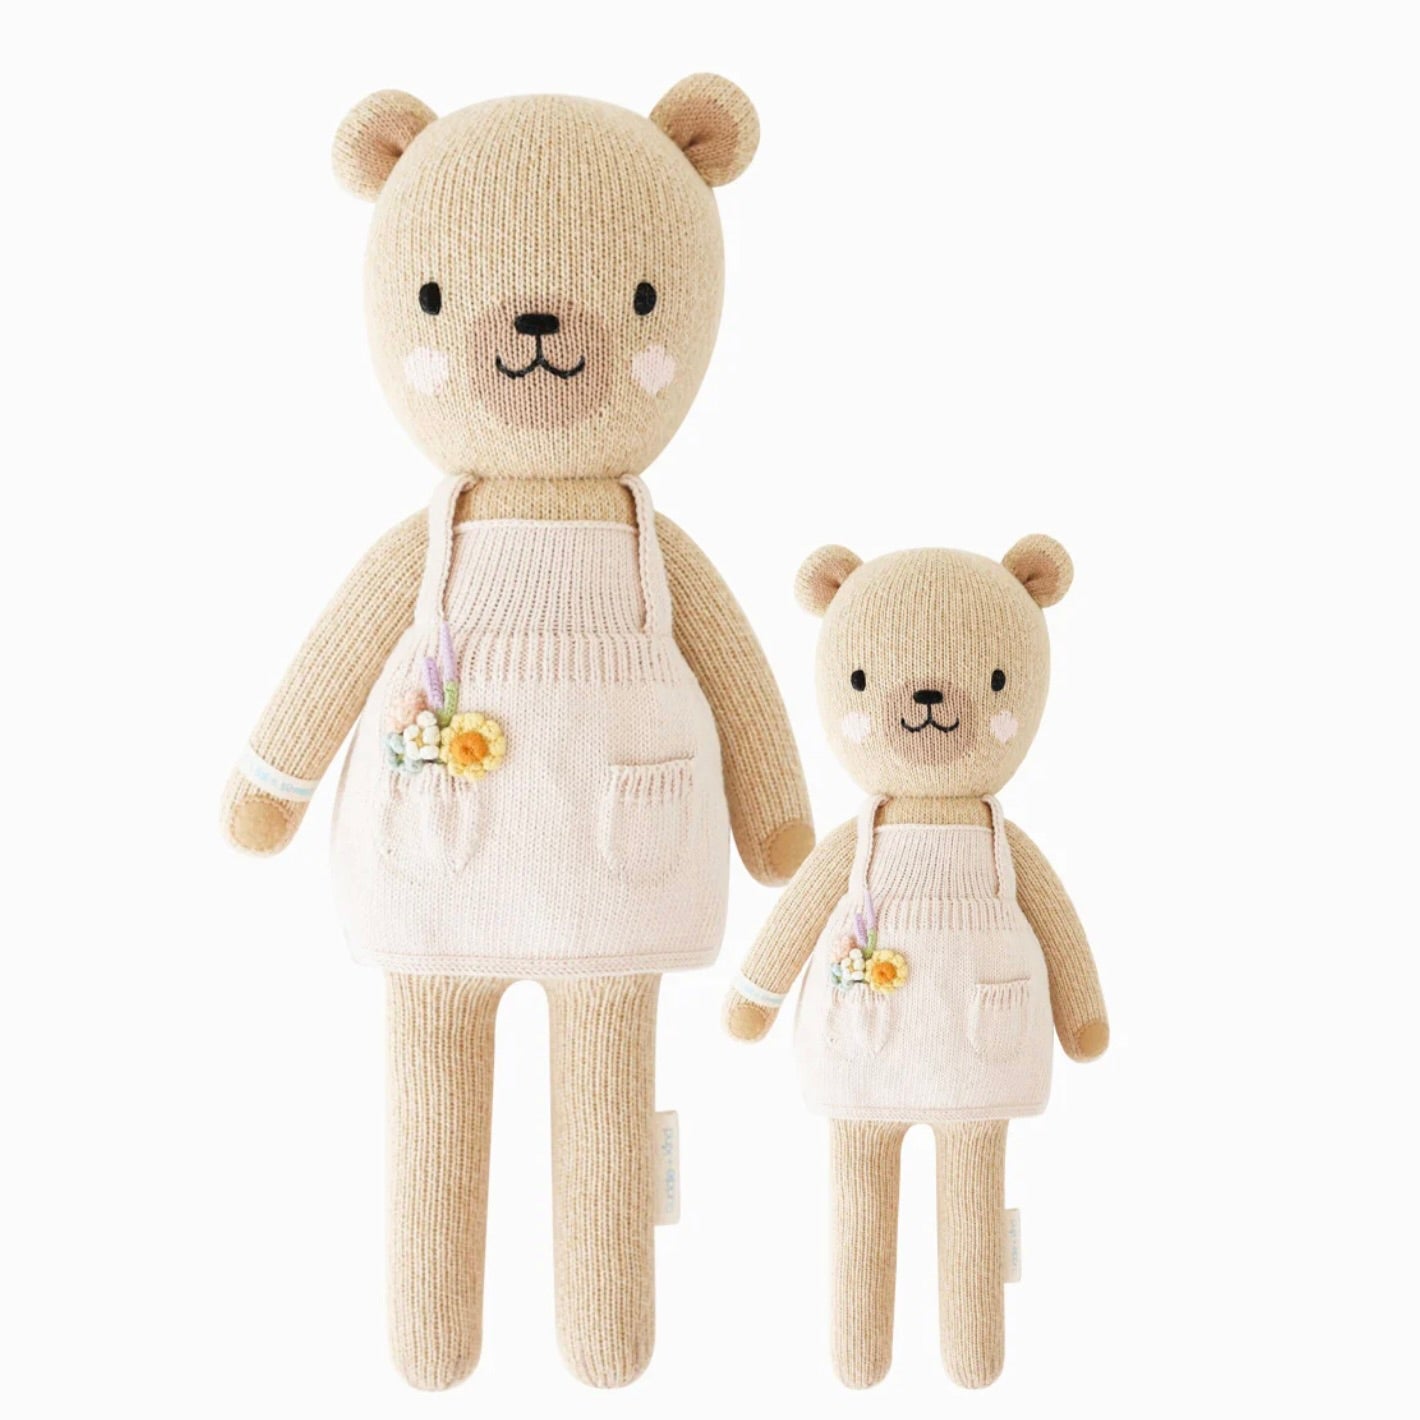 Goldie the Honey Bear by Cuddle + Kind  - 2 sizes